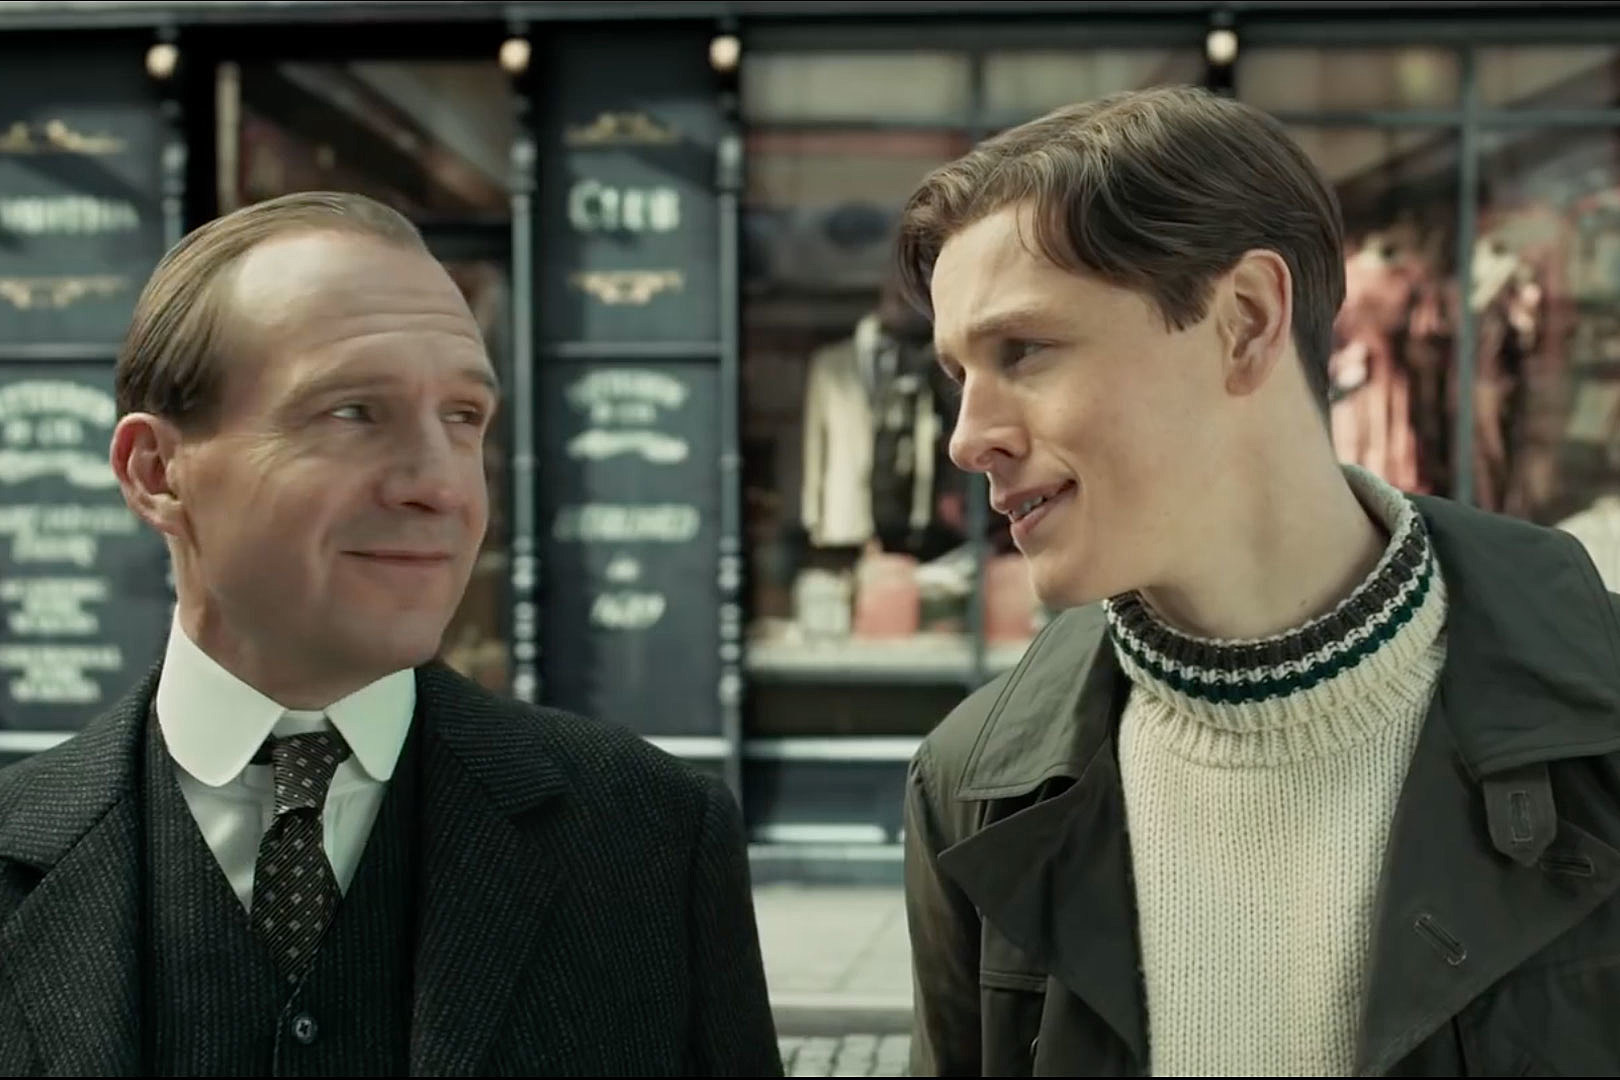 ‘The King’s Man’ Trailer: Matthew Vaughn Goes Back To The Spy Agency’s Birth During WWI